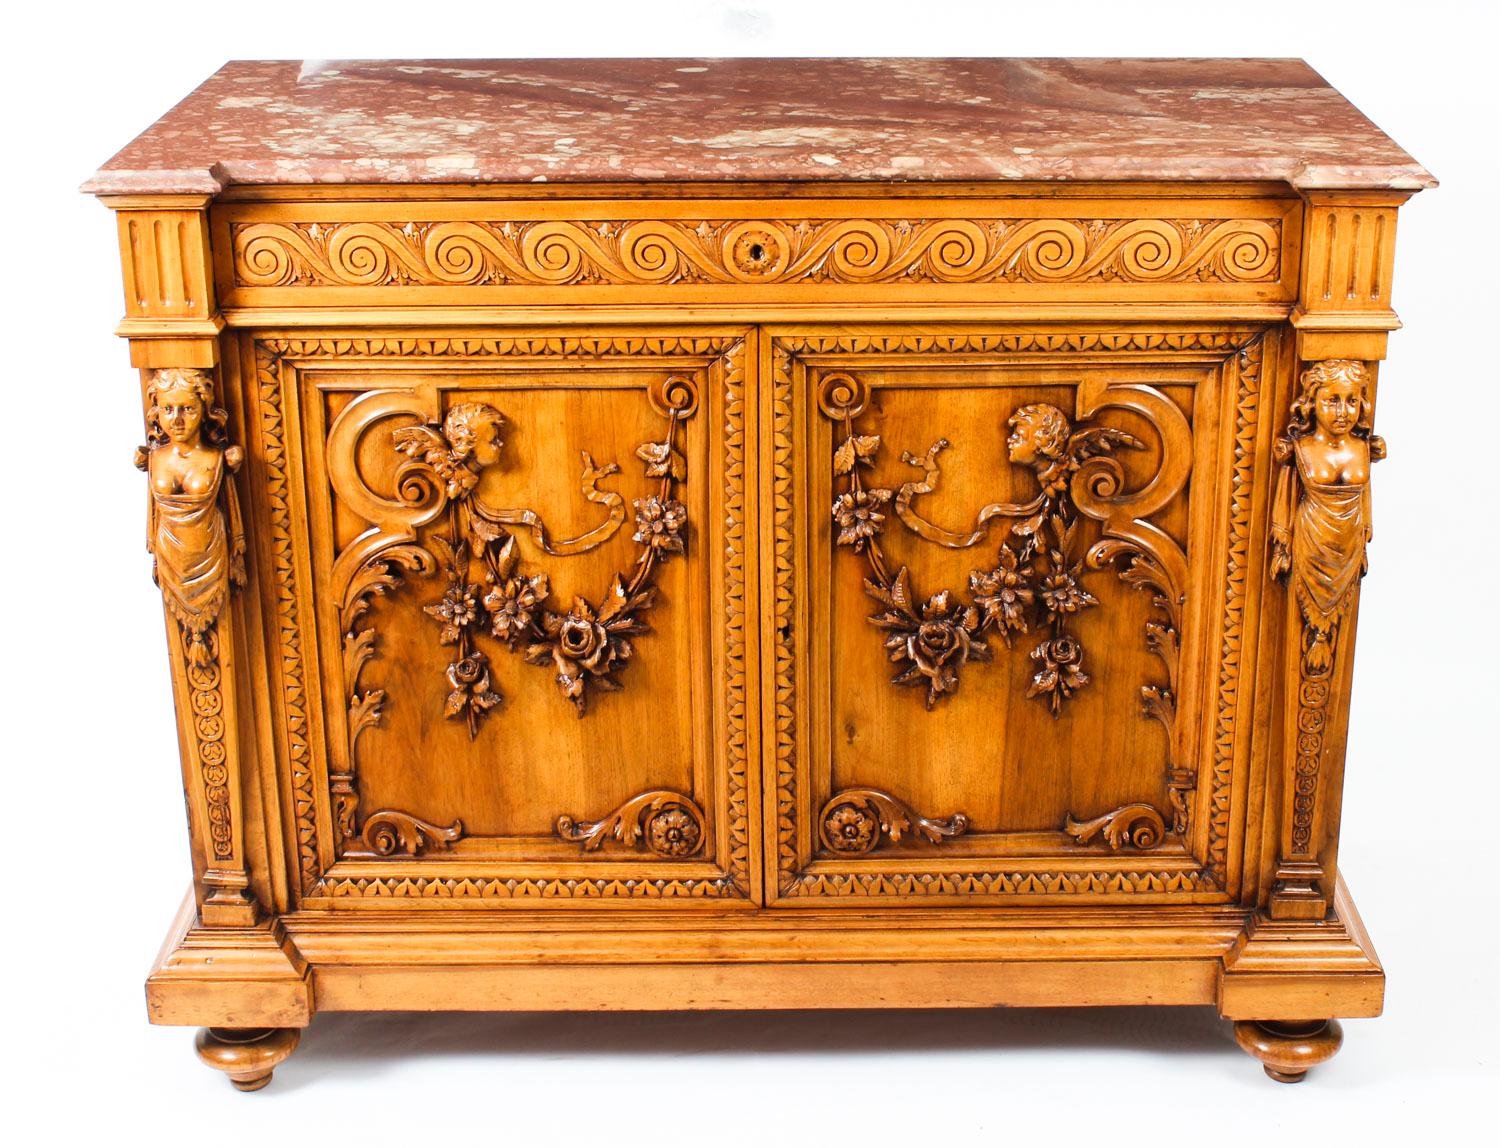 A 19th century continental walnut side cabinet, the rectangular mottled red marble top with a moulded edge above a long frieze drawer carved with vitruvian scrolls, over a pair of panelled cupboard doors decorated in relief with putti, floral swags